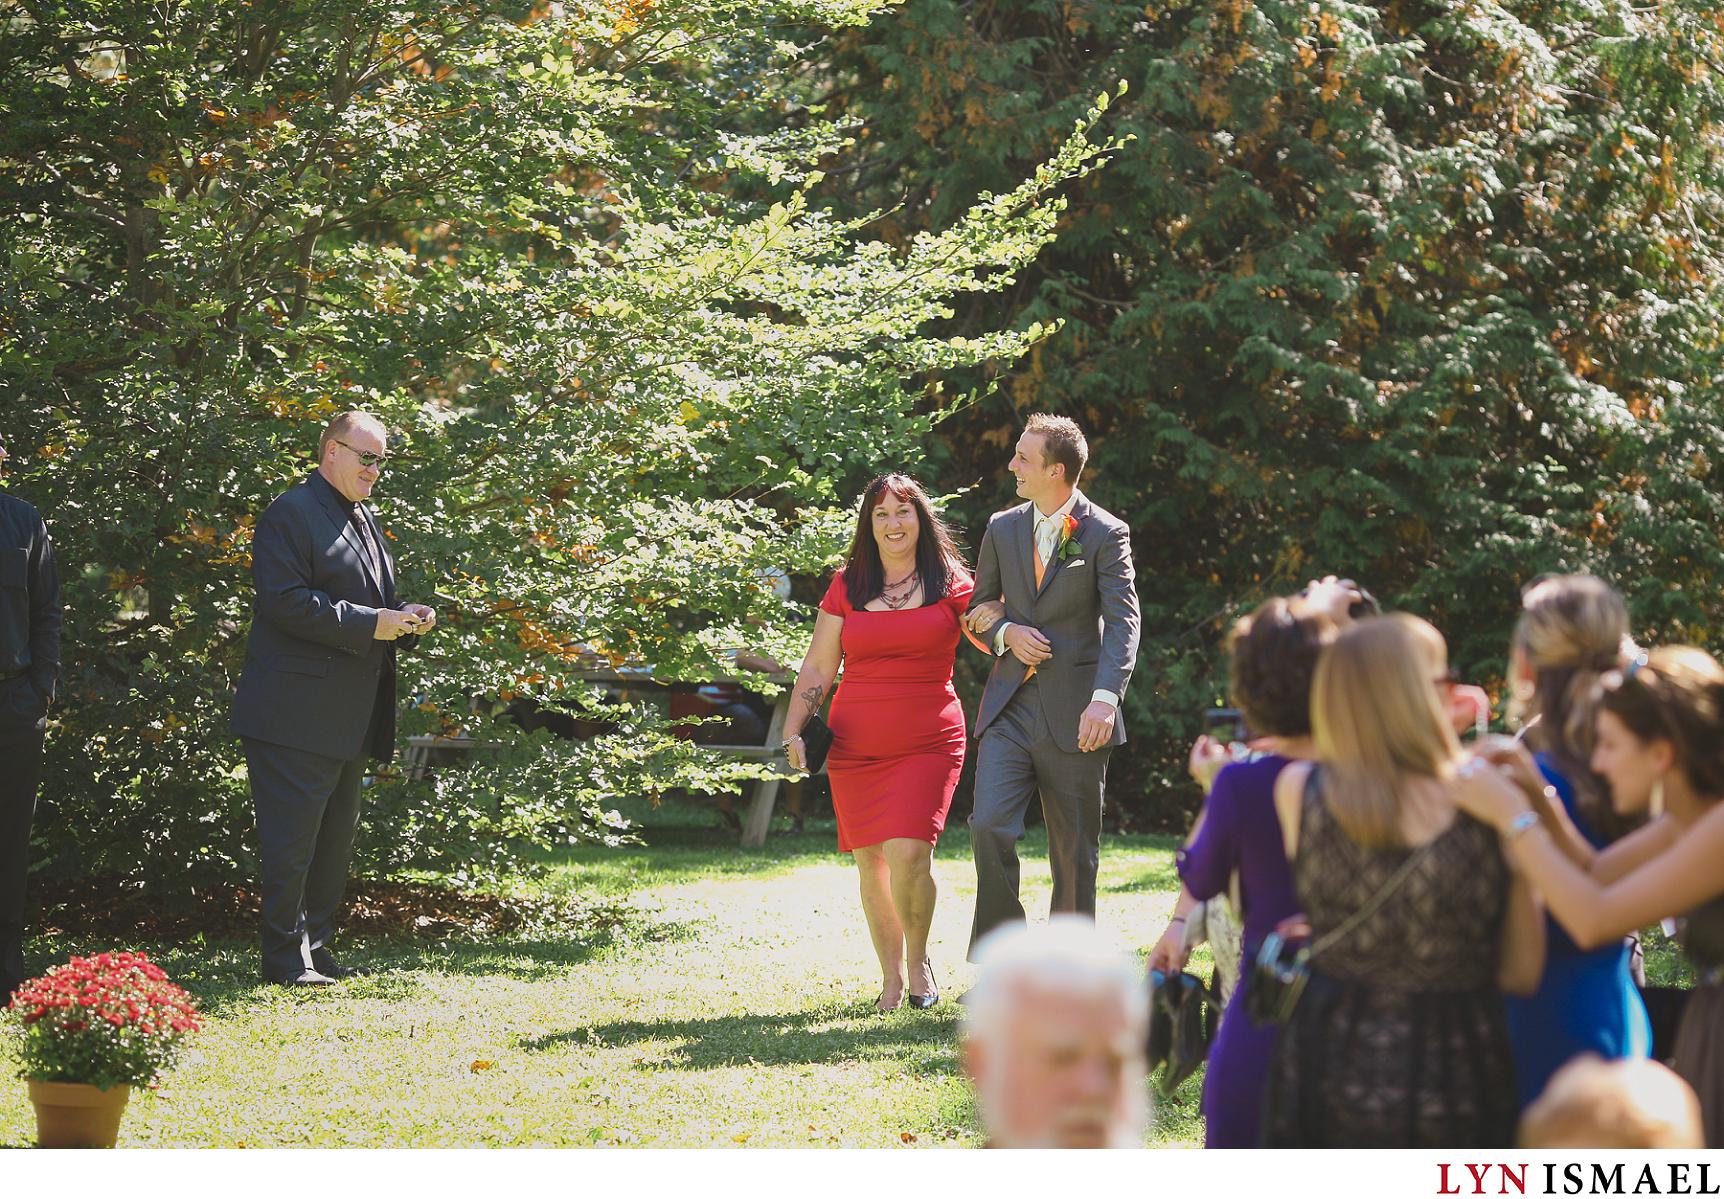 Groom walks down the aisle with his mother at an outdoor wedding ceremony in Elora, Ontario.